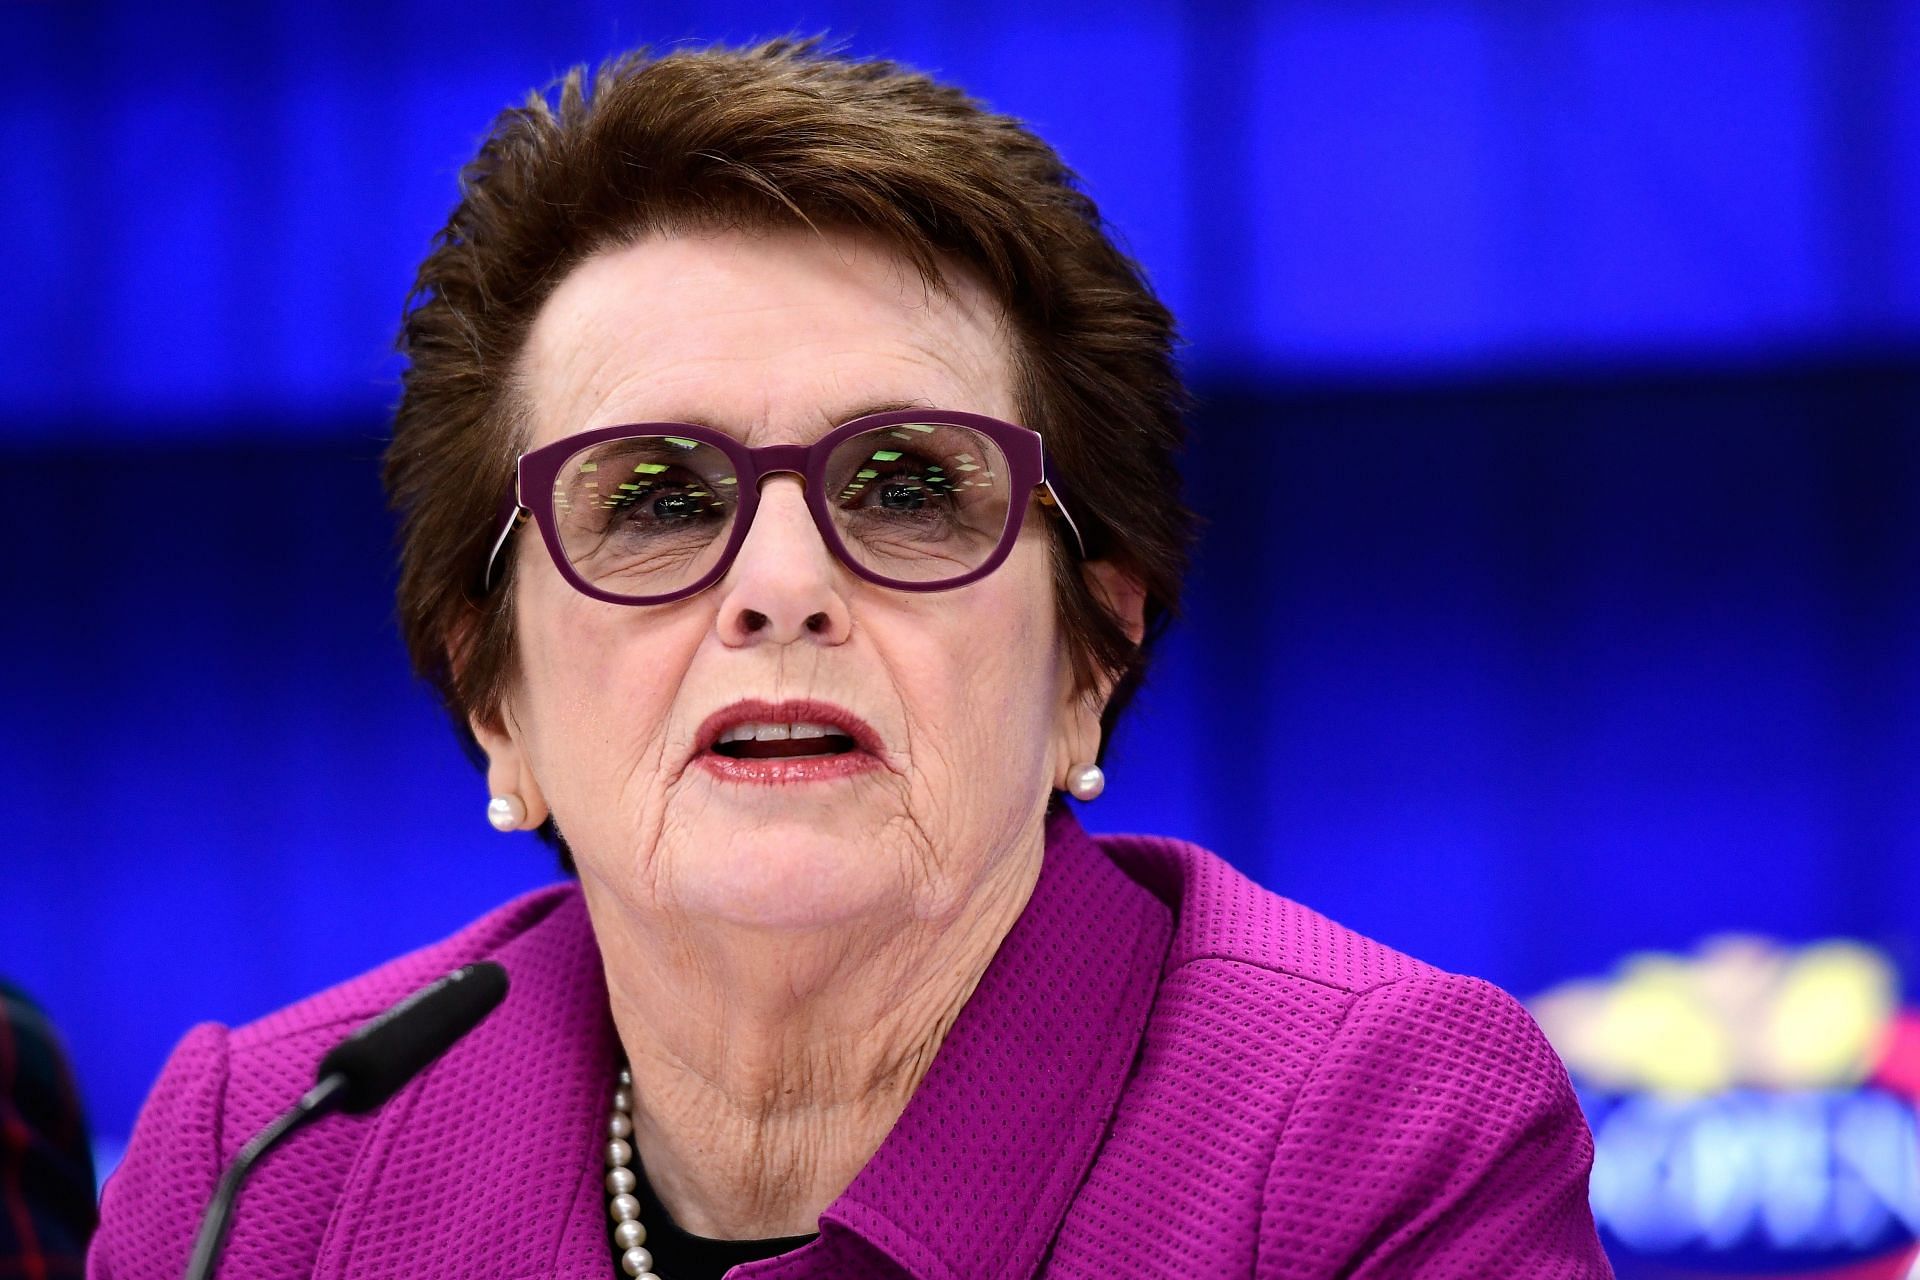 Billie Jean King awaits the 50th anniversary of the Battle of the Sexes